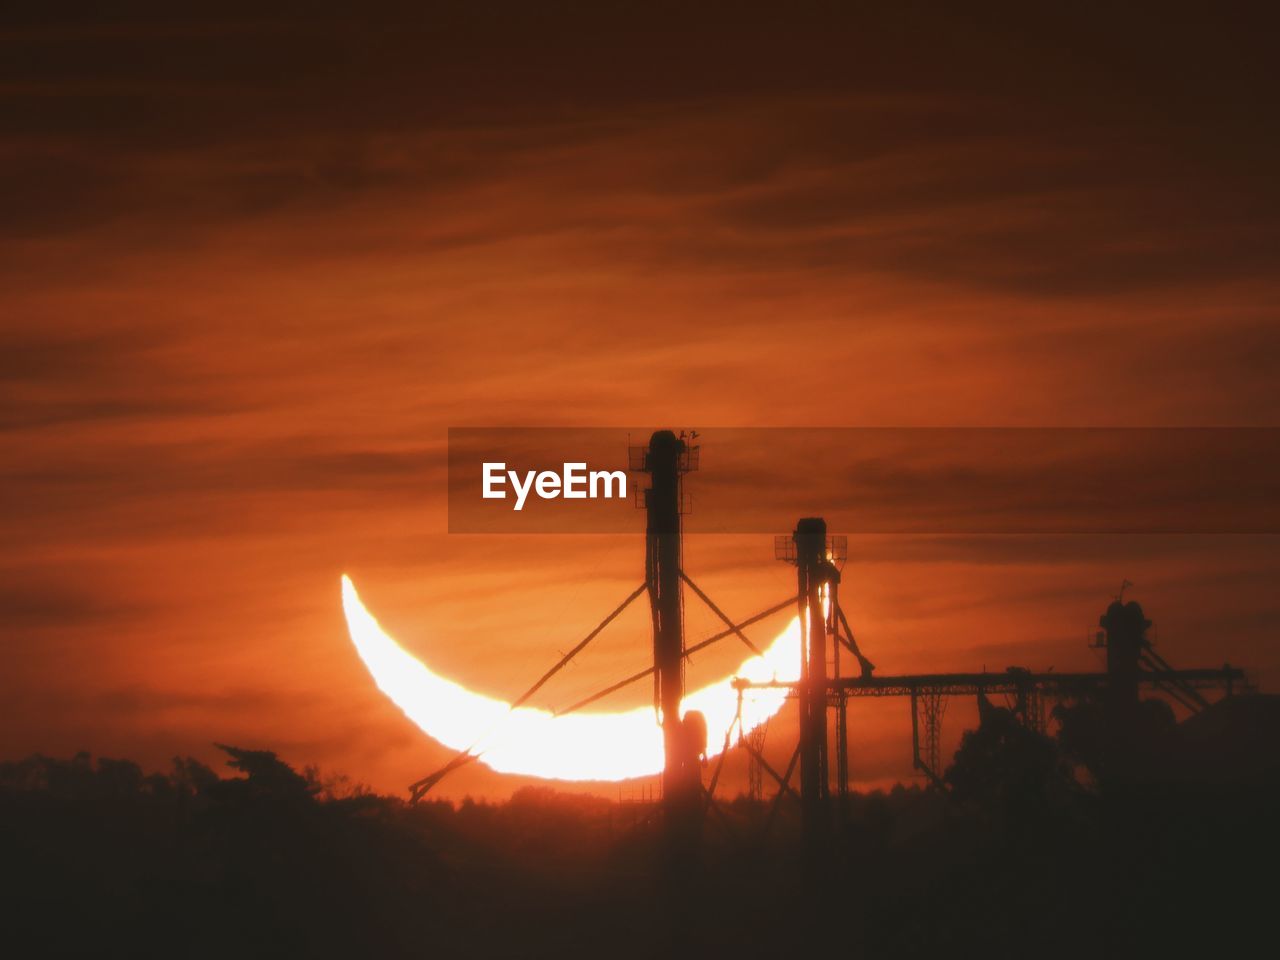 Sunset and eclipse